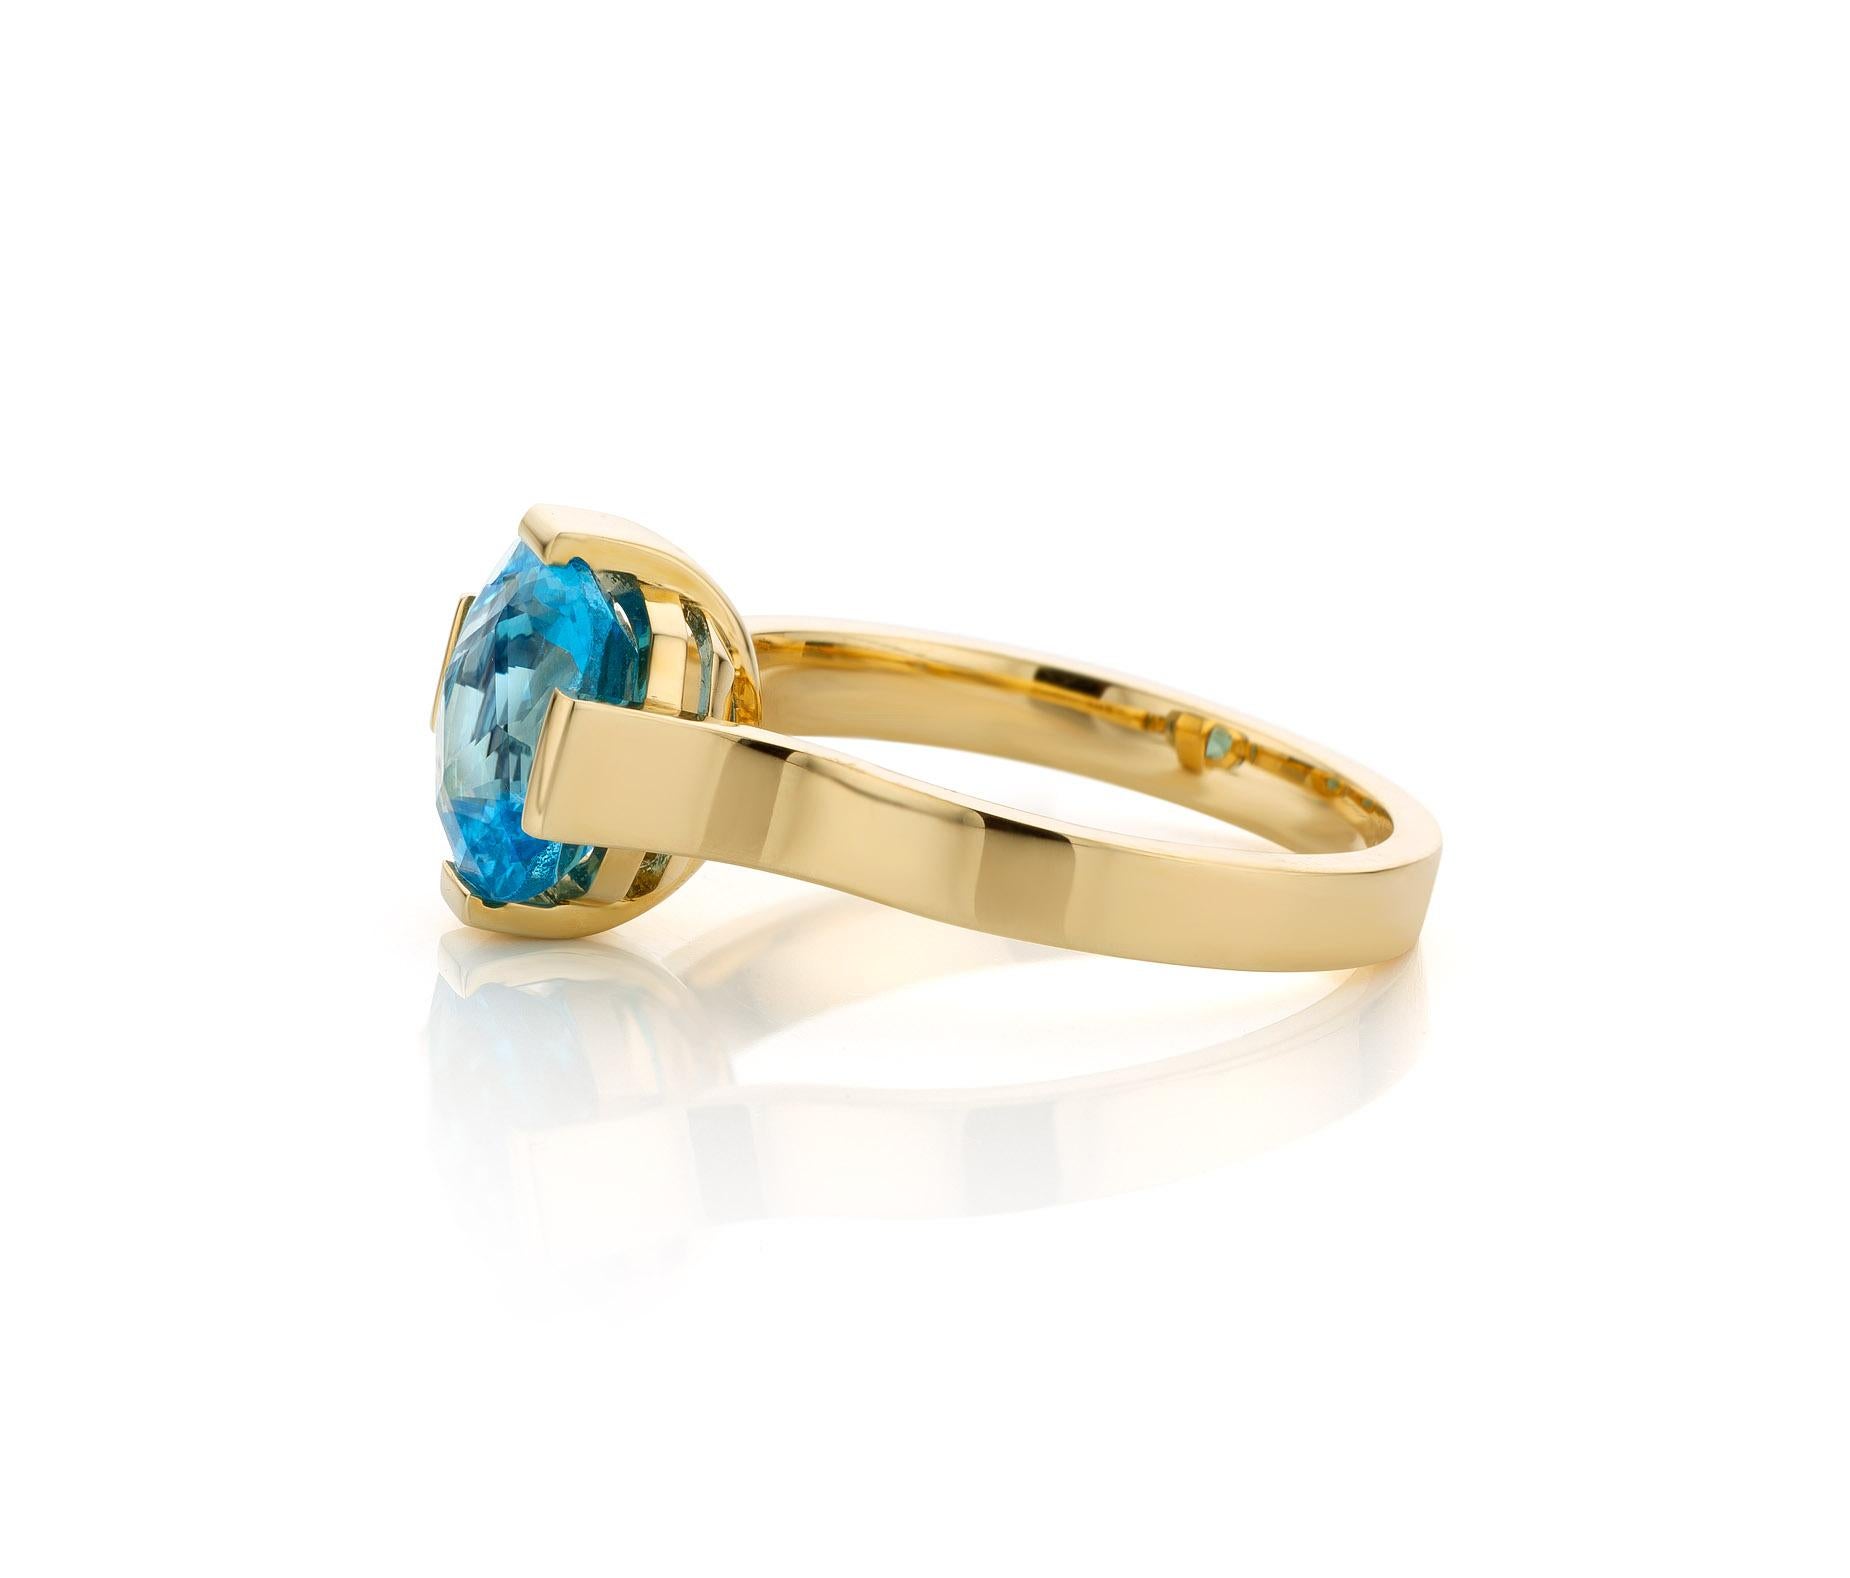 For Sale:  Cober “Blue Topaz Solitaire” set with a 3.25 Carat Blue Topaz Yellow Gold Ring 4